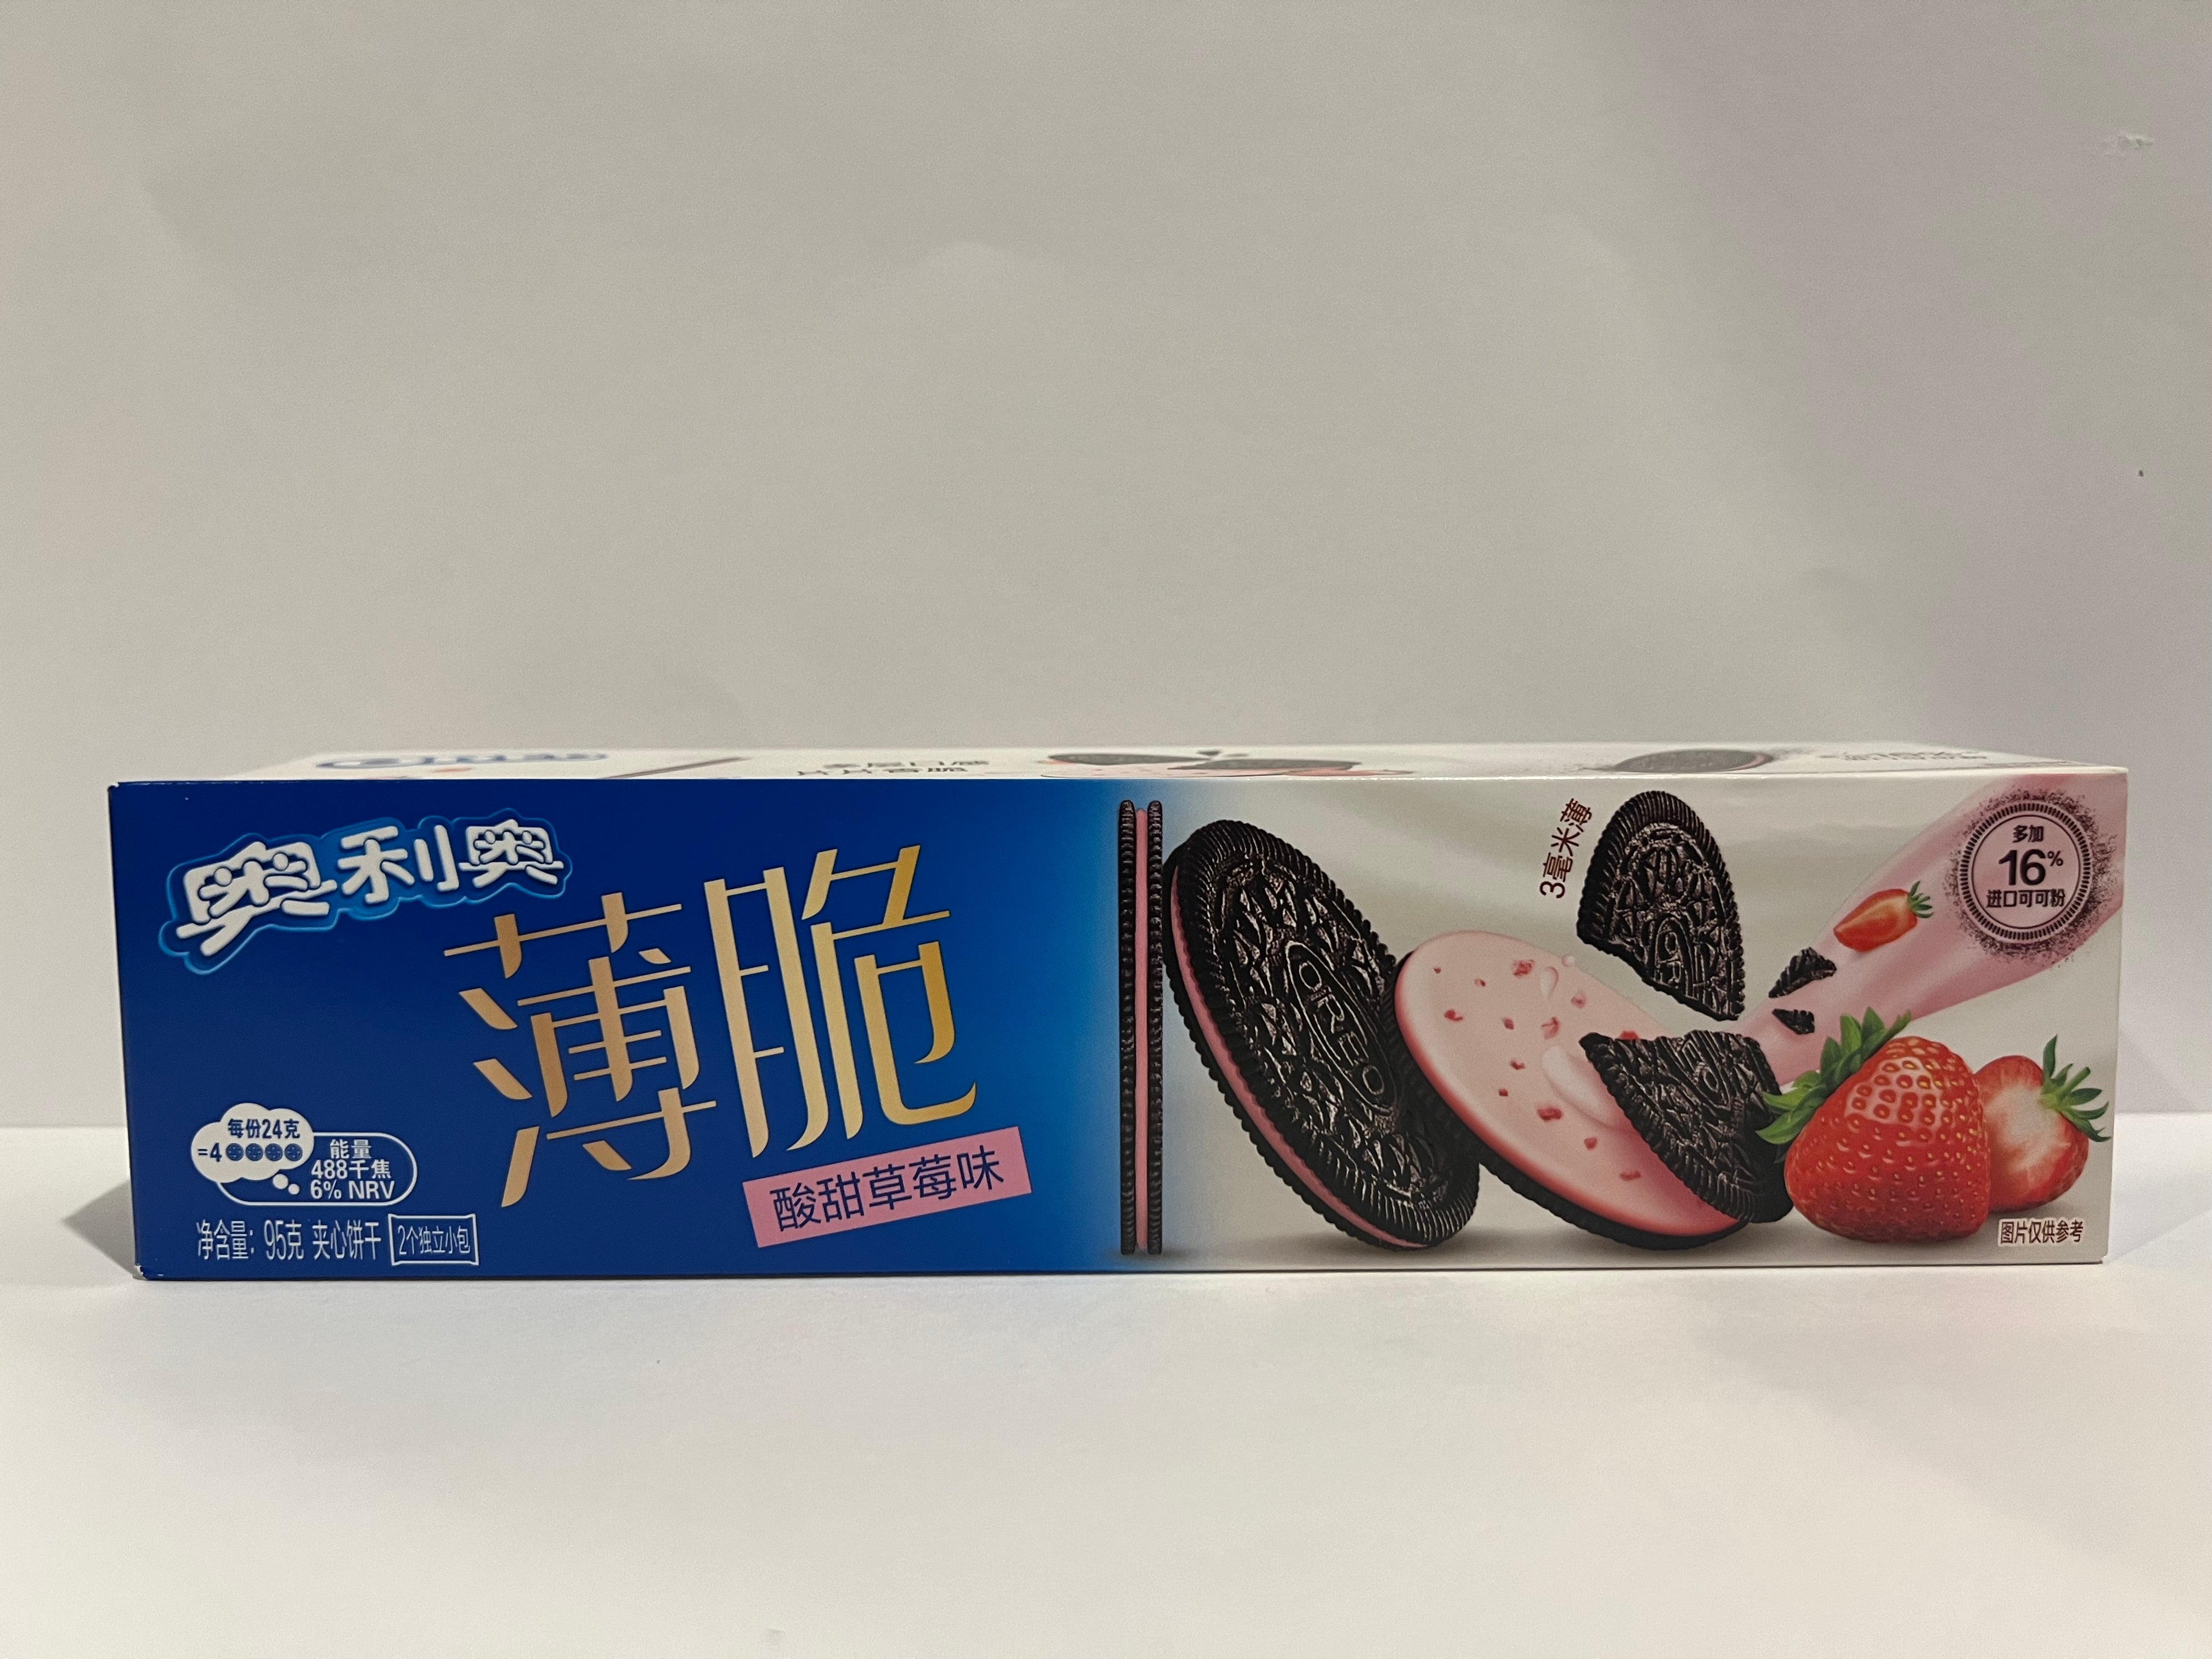 Oreo crisp Sweet and sour strawberry flavor